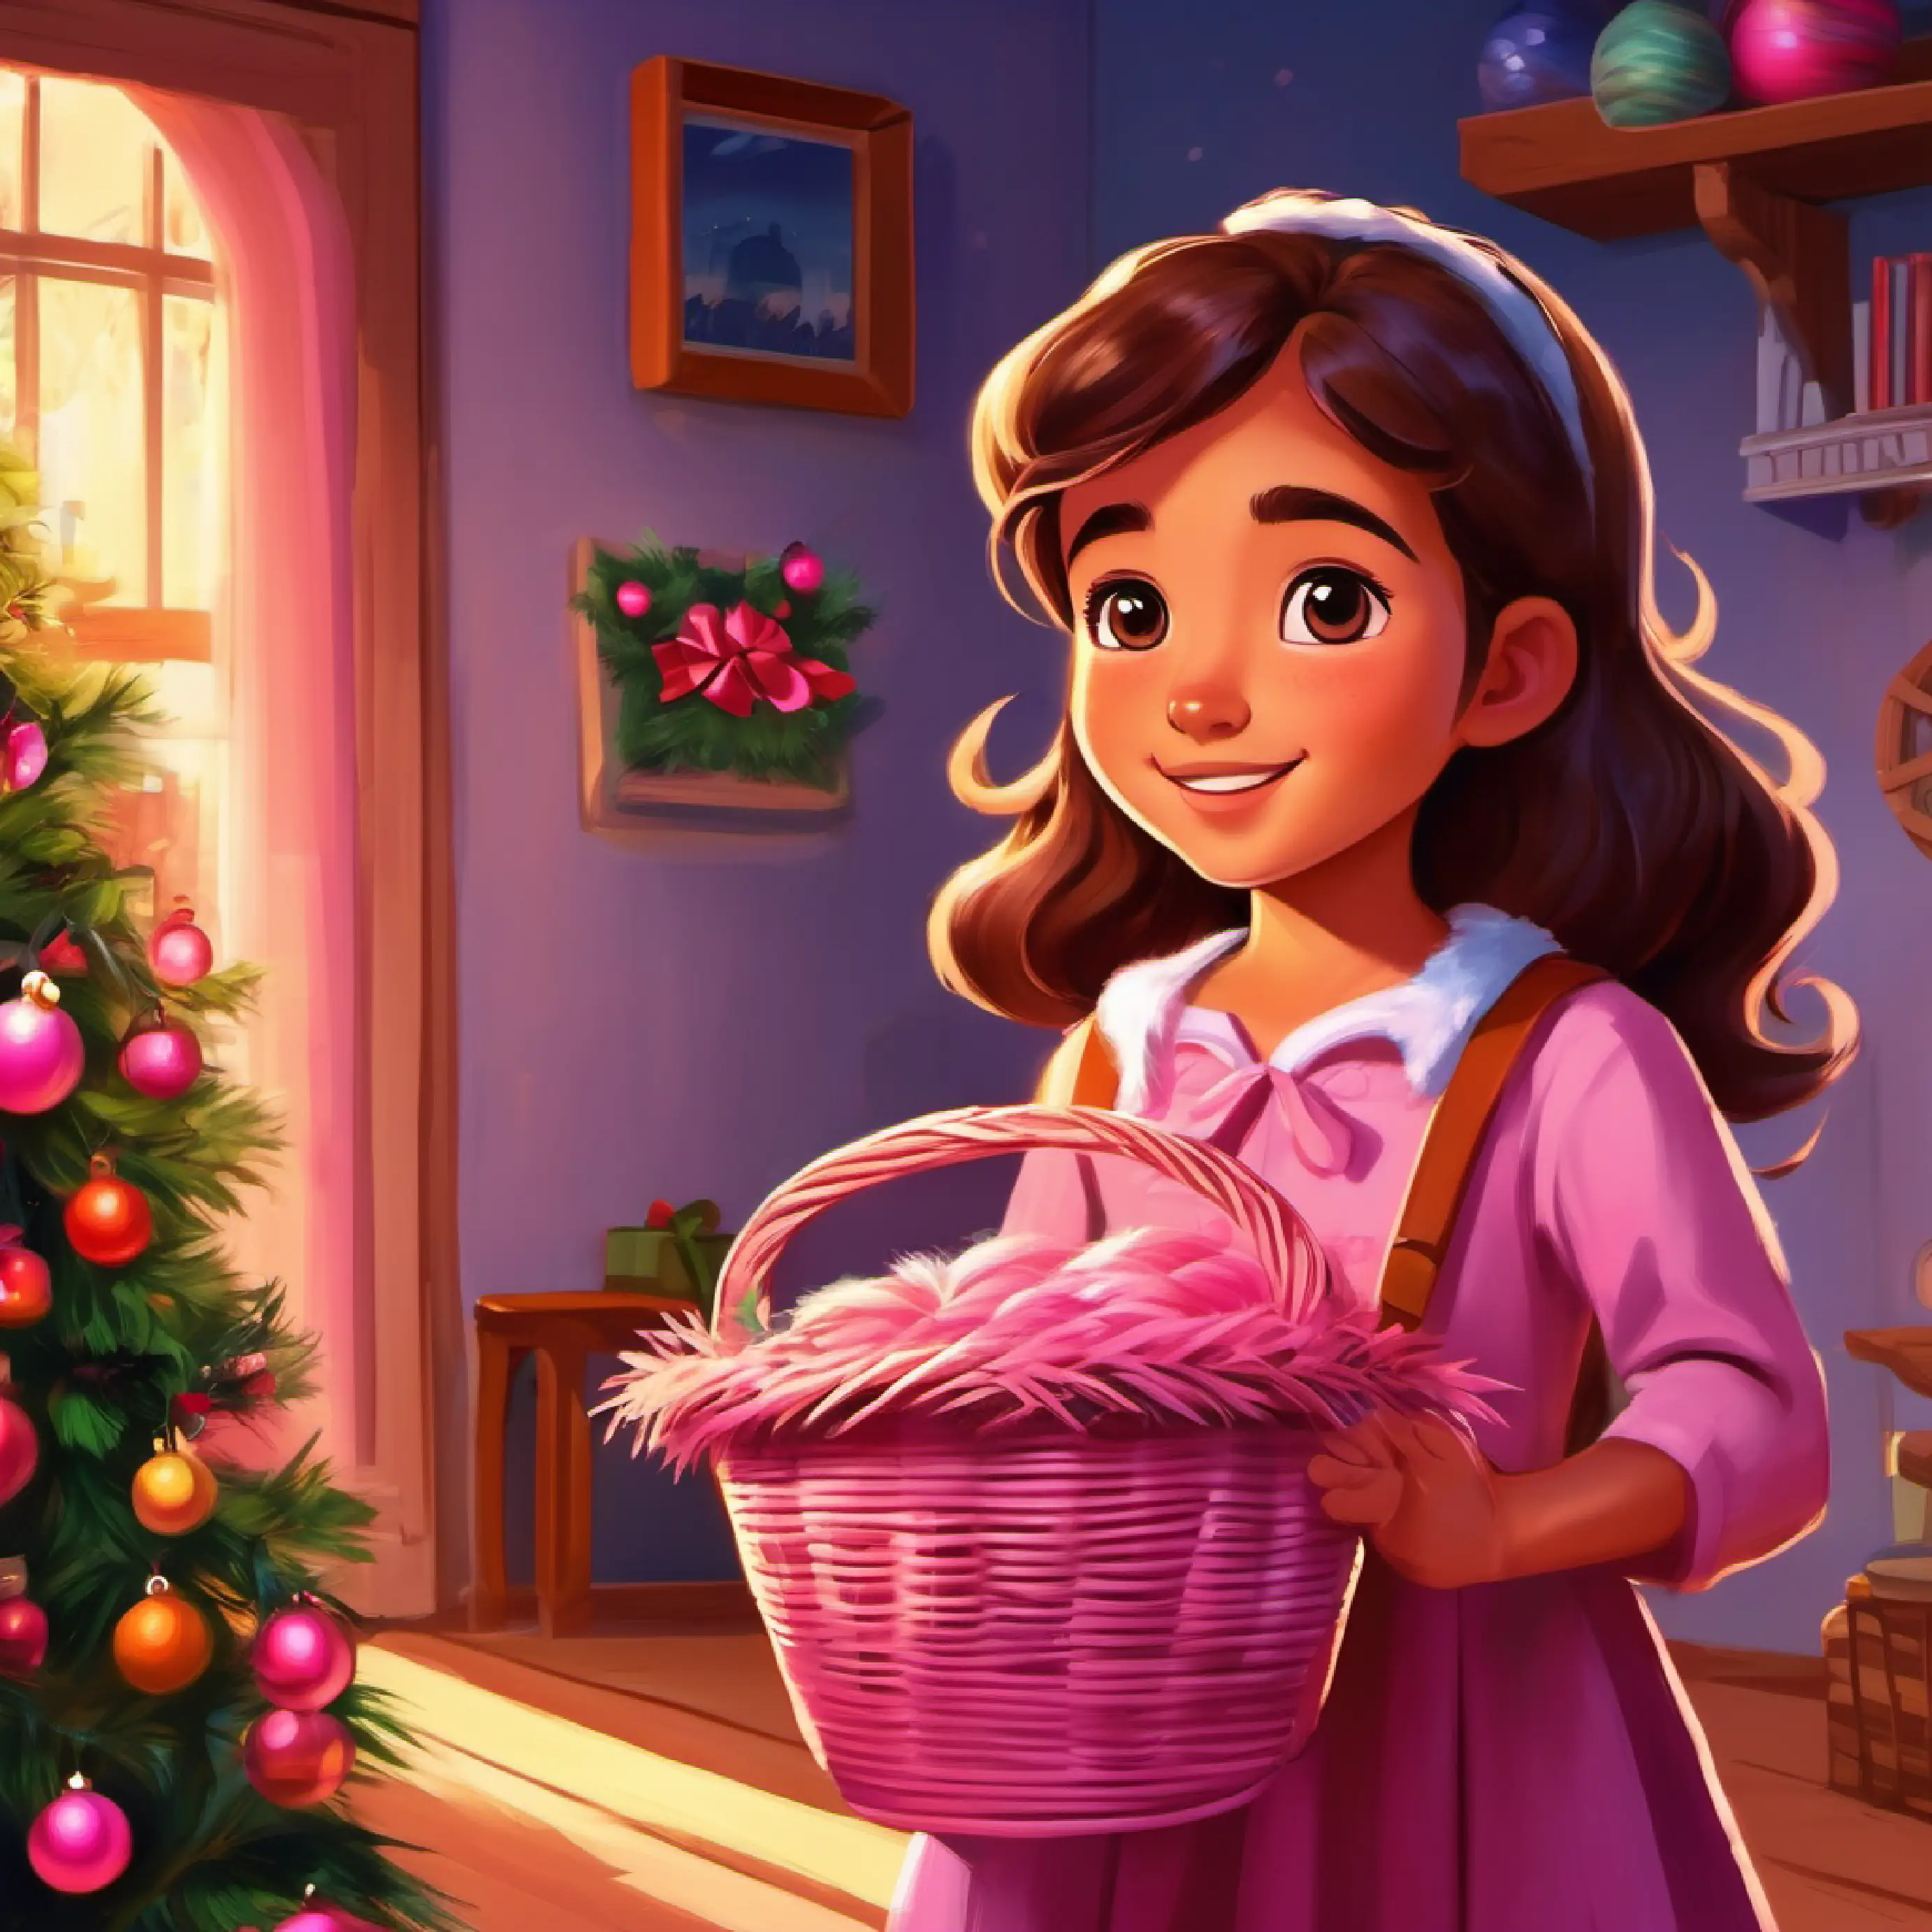 A spirited, curious girl with brown eyes and tanned skin eager for adventures discovers a mysterious pink basket, at her home in Sunnyville.